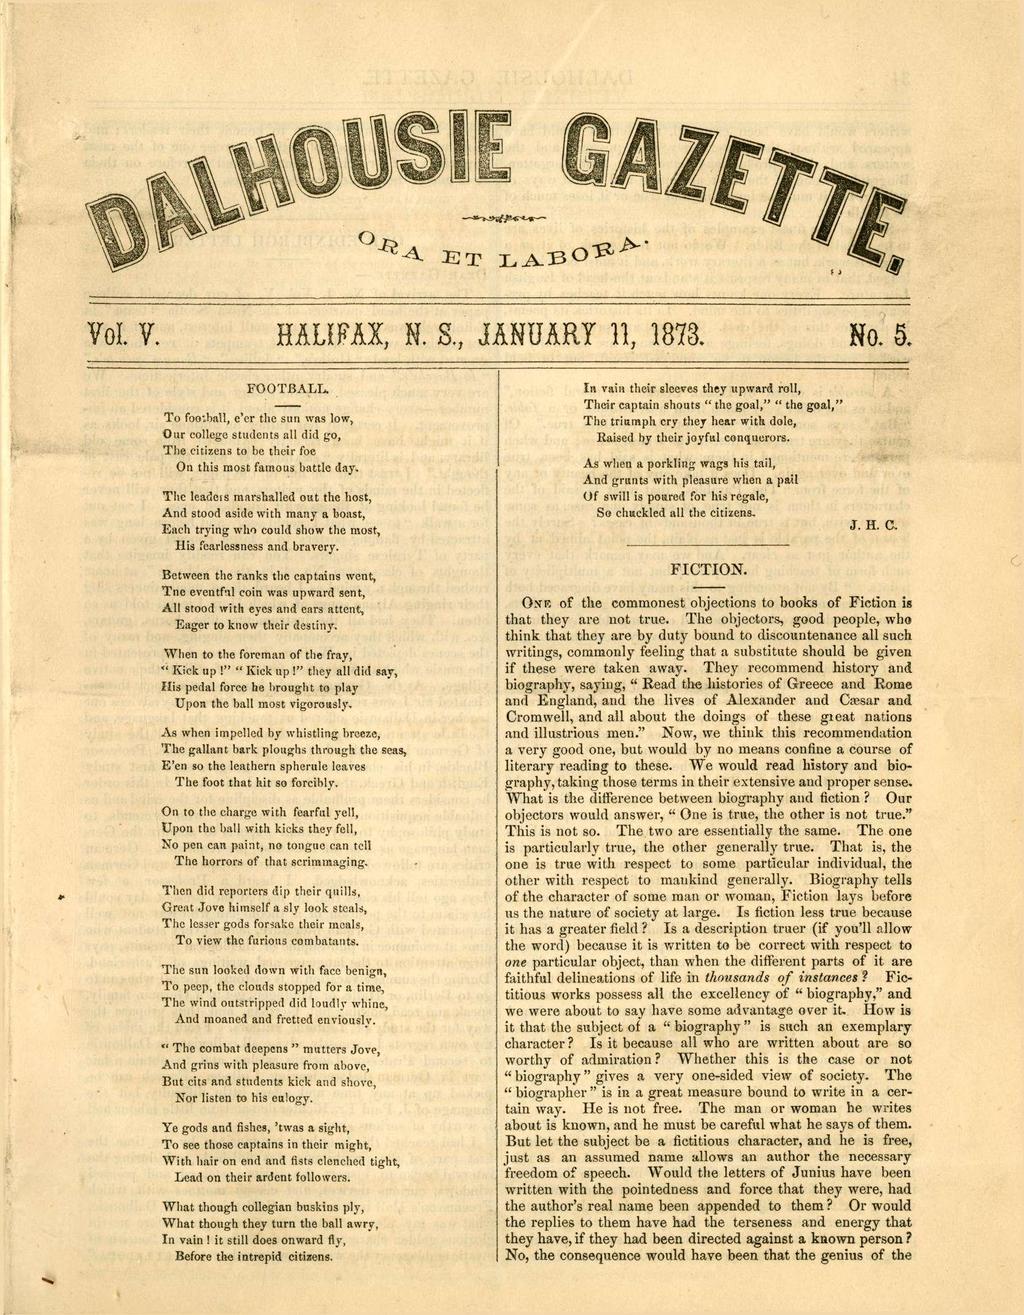 Vol. V. HALIFAX, N. S, JANUARY 11, 1873. No. 5. FOOTBALL. To football, e'e the sun was low, Ou college students all did go, The citizens to be thei foe On this most famous battle day.